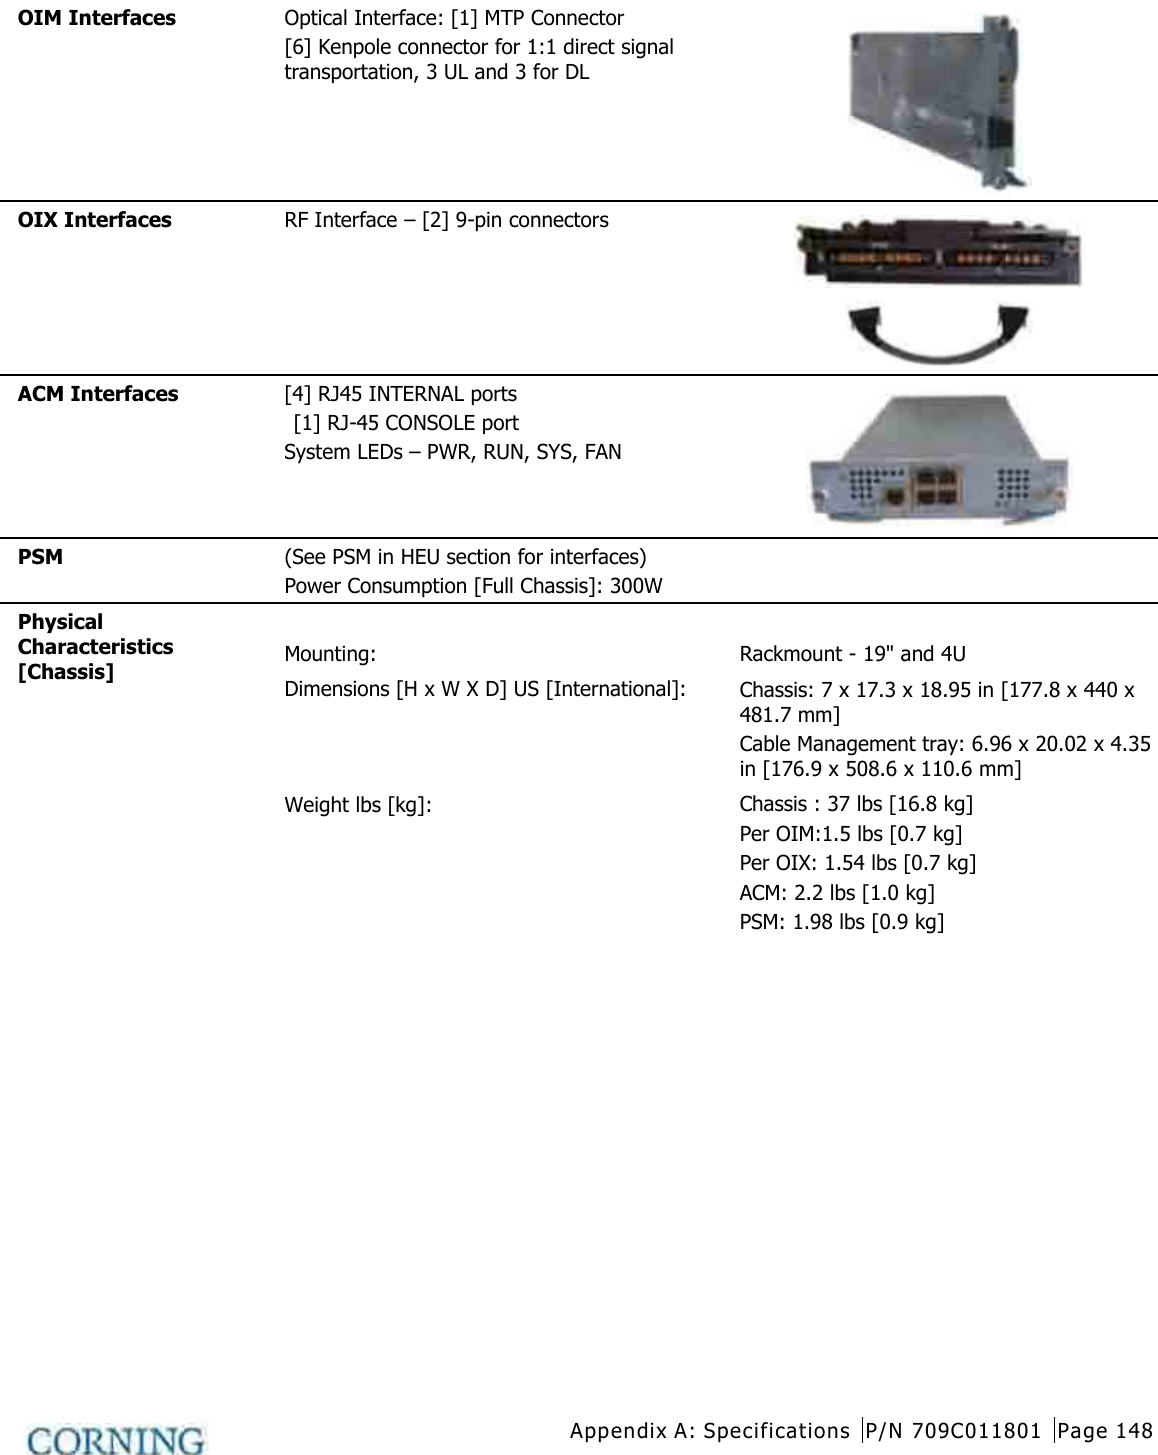  Appendix A: Specifications  P/N 709C011801 Page 148   OIM Interfaces Optical Interface: [1] MTP Connector   [6] Kenpole connector for 1:1 direct signal transportation, 3 UL and 3 for DL  OIX Interfaces RF Interface – [2] 9-pin connectors   ACM Interfaces [4] RJ45 INTERNAL ports    [1] RJ-45 CONSOLE port System LEDs – PWR, RUN, SYS, FAN  PSM    (See PSM in HEU section for interfaces) Power Consumption [Full Chassis]: 300W  Physical Characteristics [Chassis]  Mounting: Rackmount - 19&quot; and 4U Dimensions [H x W X D] US [International]: Chassis: 7 x 17.3 x 18.95 in [177.8 x 440 x 481.7 mm] Cable Management tray: 6.96 x 20.02 x 4.35 in [176.9 x 508.6 x 110.6 mm] Weight lbs [kg]:  Chassis : 37 lbs [16.8 kg] Per OIM:1.5 lbs [0.7 kg]   Per OIX: 1.54 lbs [0.7 kg] ACM: 2.2 lbs [1.0 kg] PSM: 1.98 lbs [0.9 kg]    